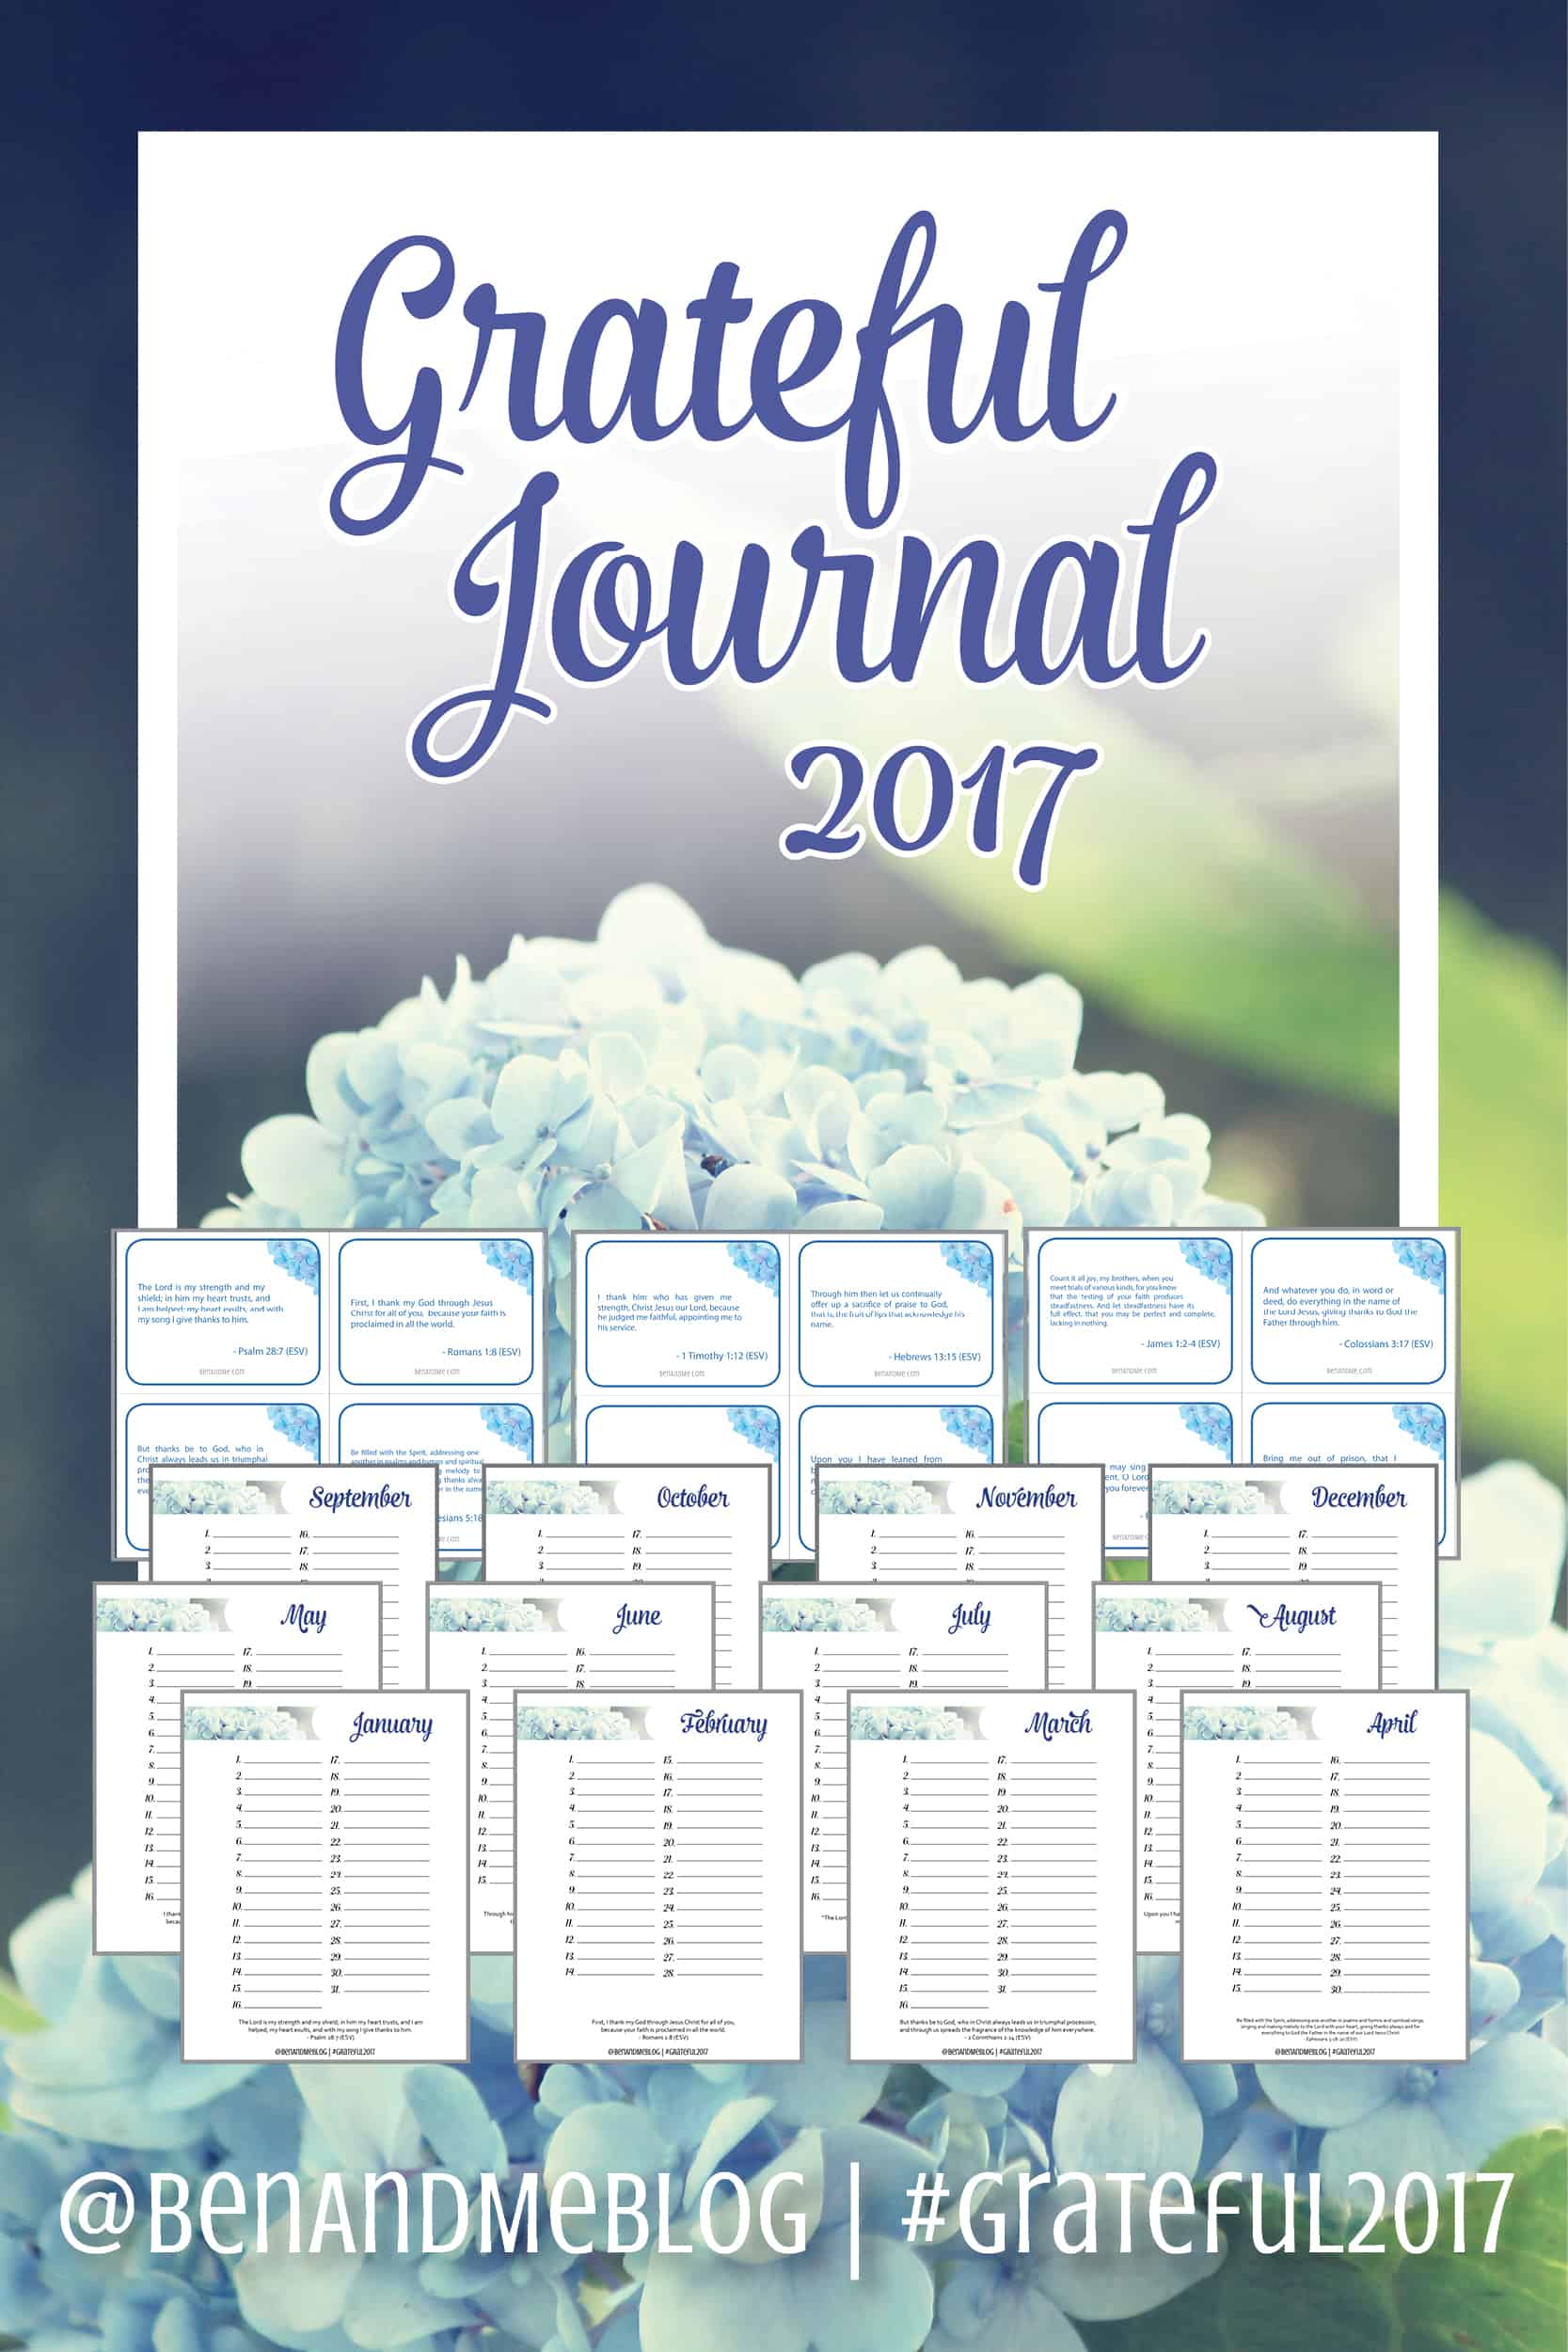 FREE! Grateful Journal 2017 -- Included with the journal are Scripture cards with 12 brand new verses about gratitude. The concept is simple. Just write down one thing for which you are grateful each day. At the end of the year, you will have recorded 365 beautiful blessings, and memorized 12 grateful verses.